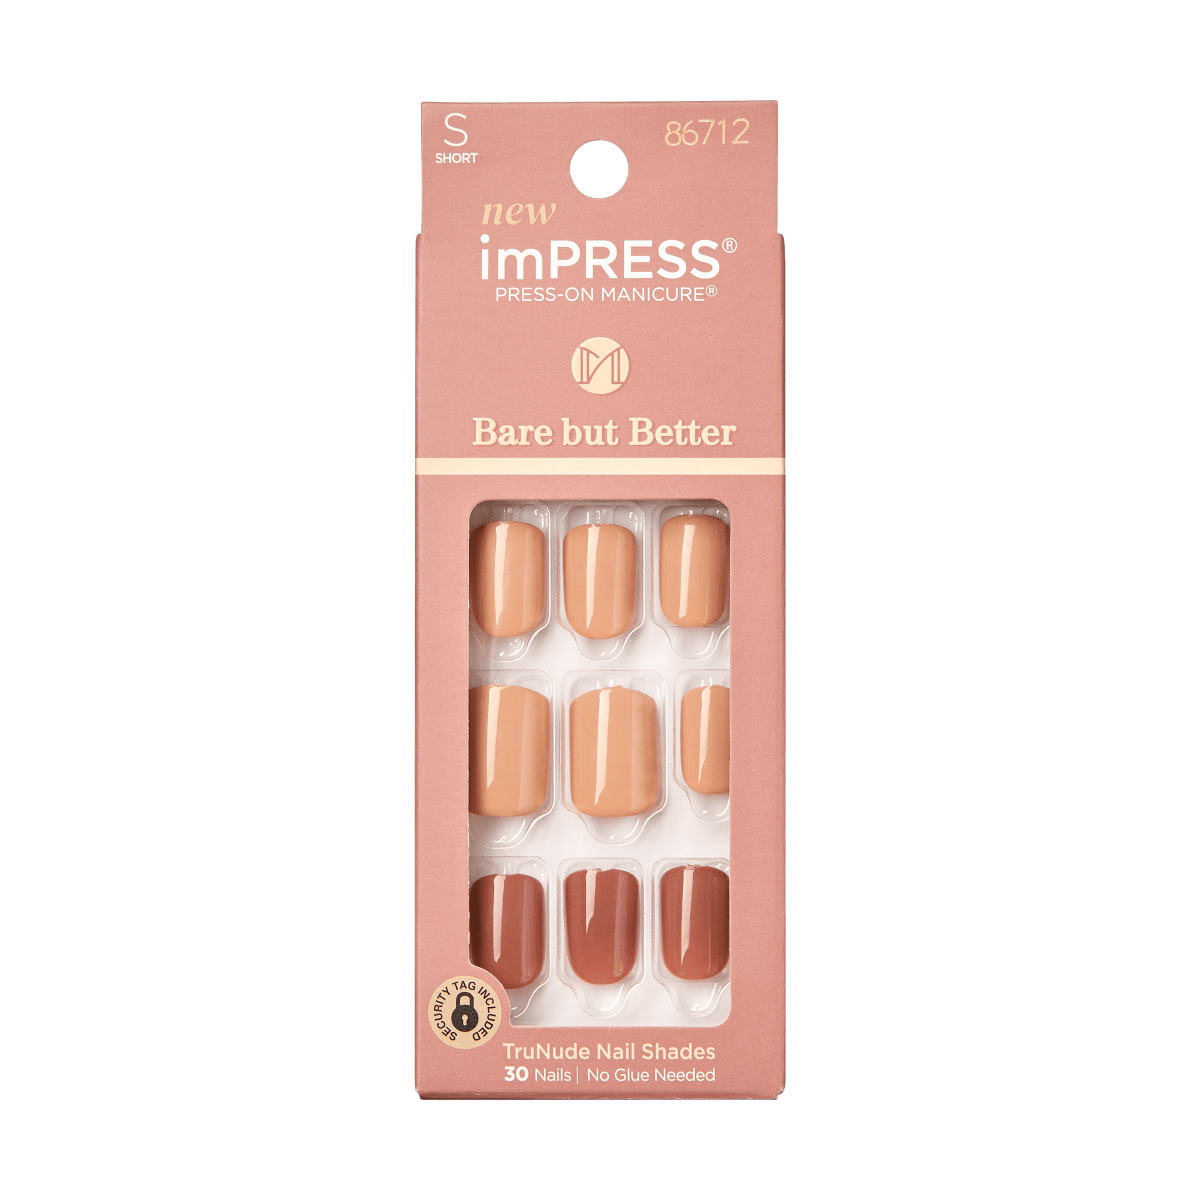 imPRESS Bare but Better Press-On Manicure - Sweet Earth